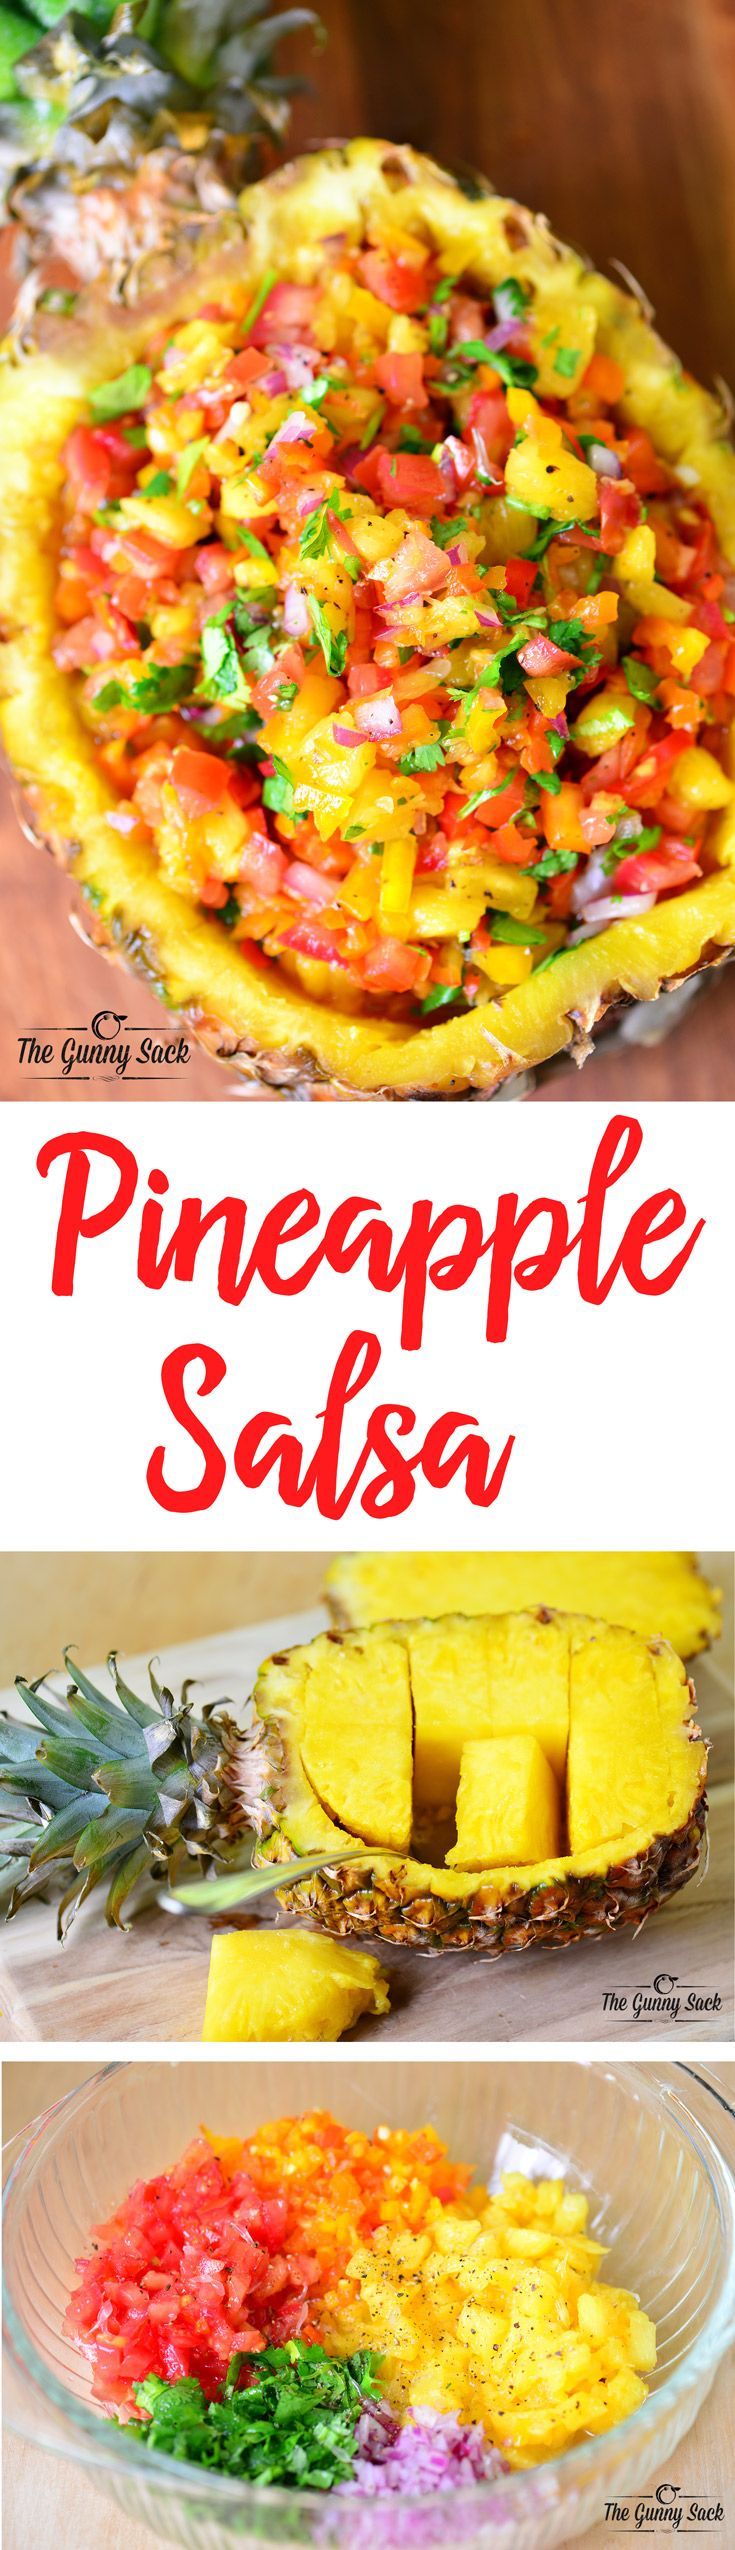 This pineapple salsa recipe has a delicious combination of sweet and spicy. It can be served with gril